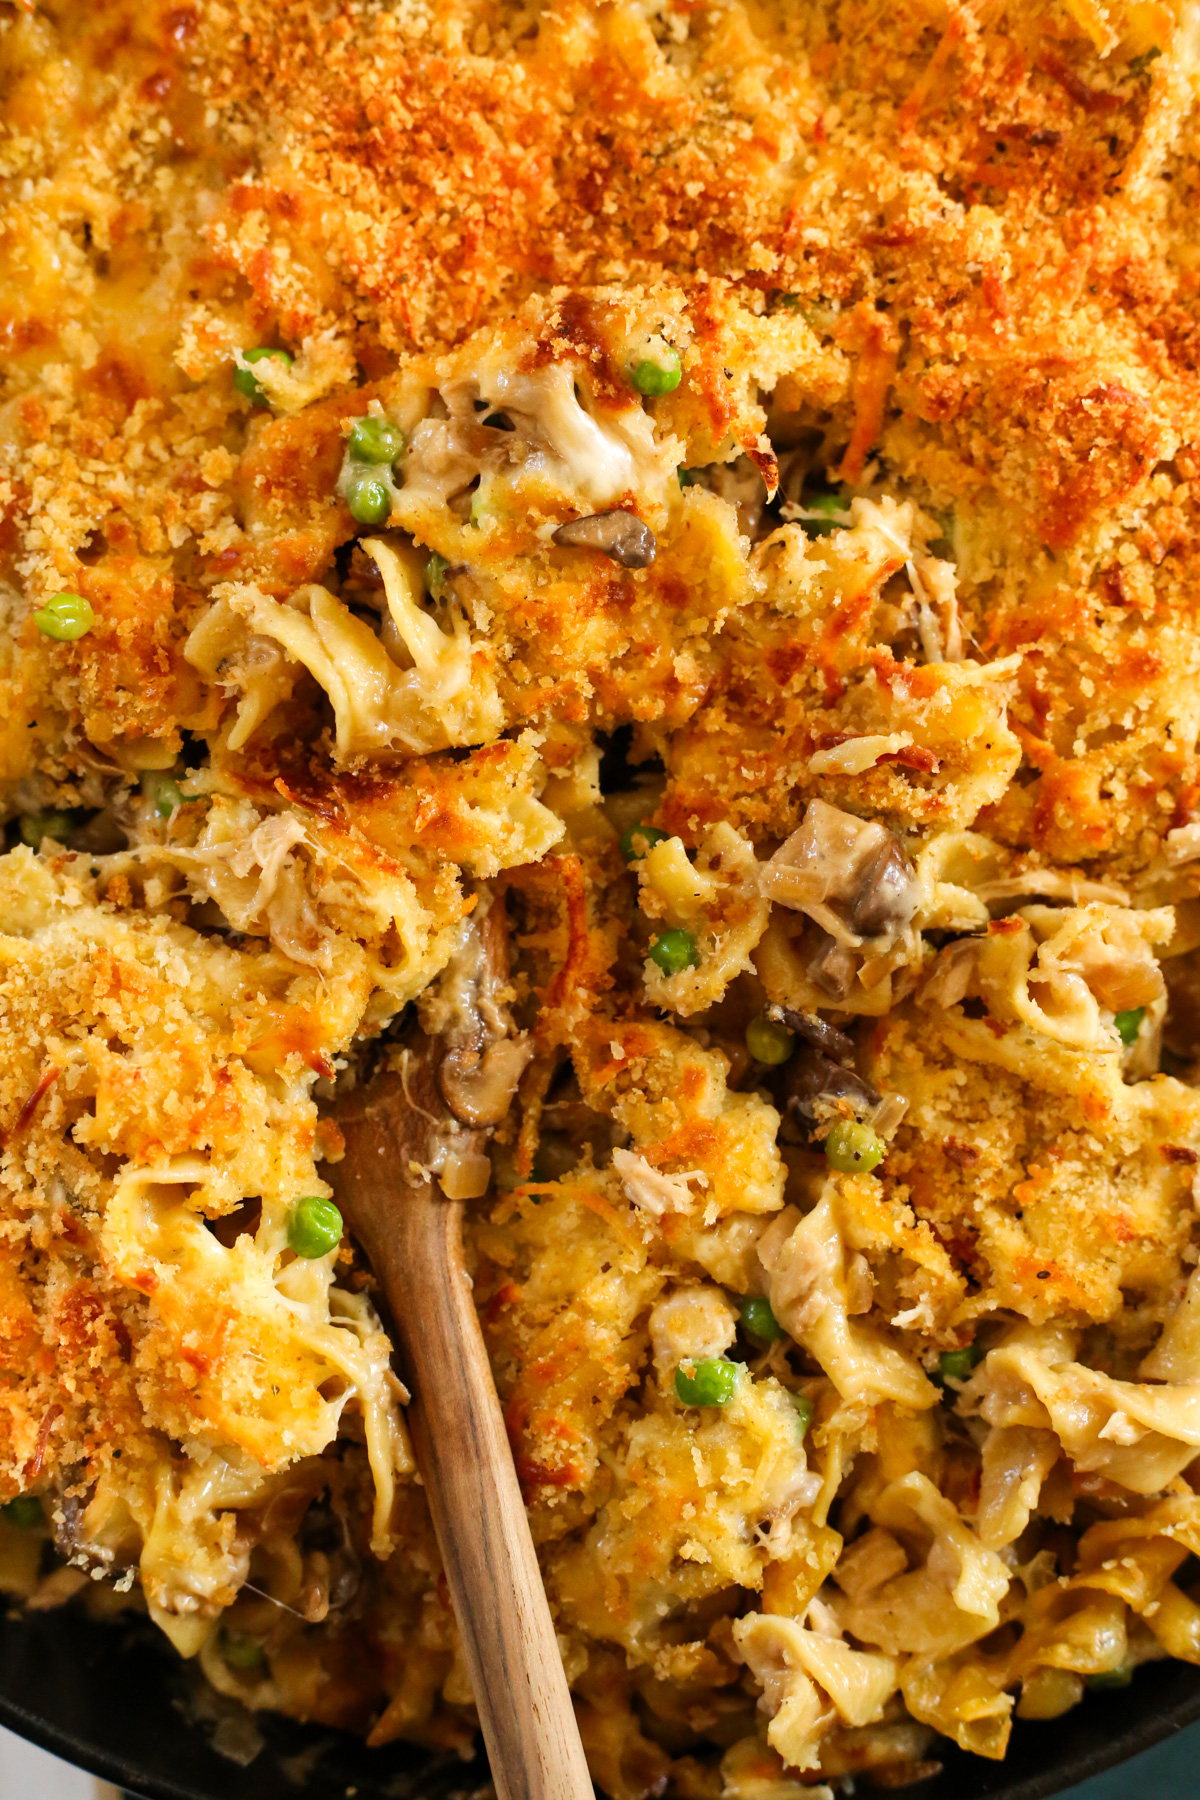 A close view into a cheesy tuna noodle casserole, showing the creamy sauce and melted cheese with a wooden serving spoon included as if about to serve the meal